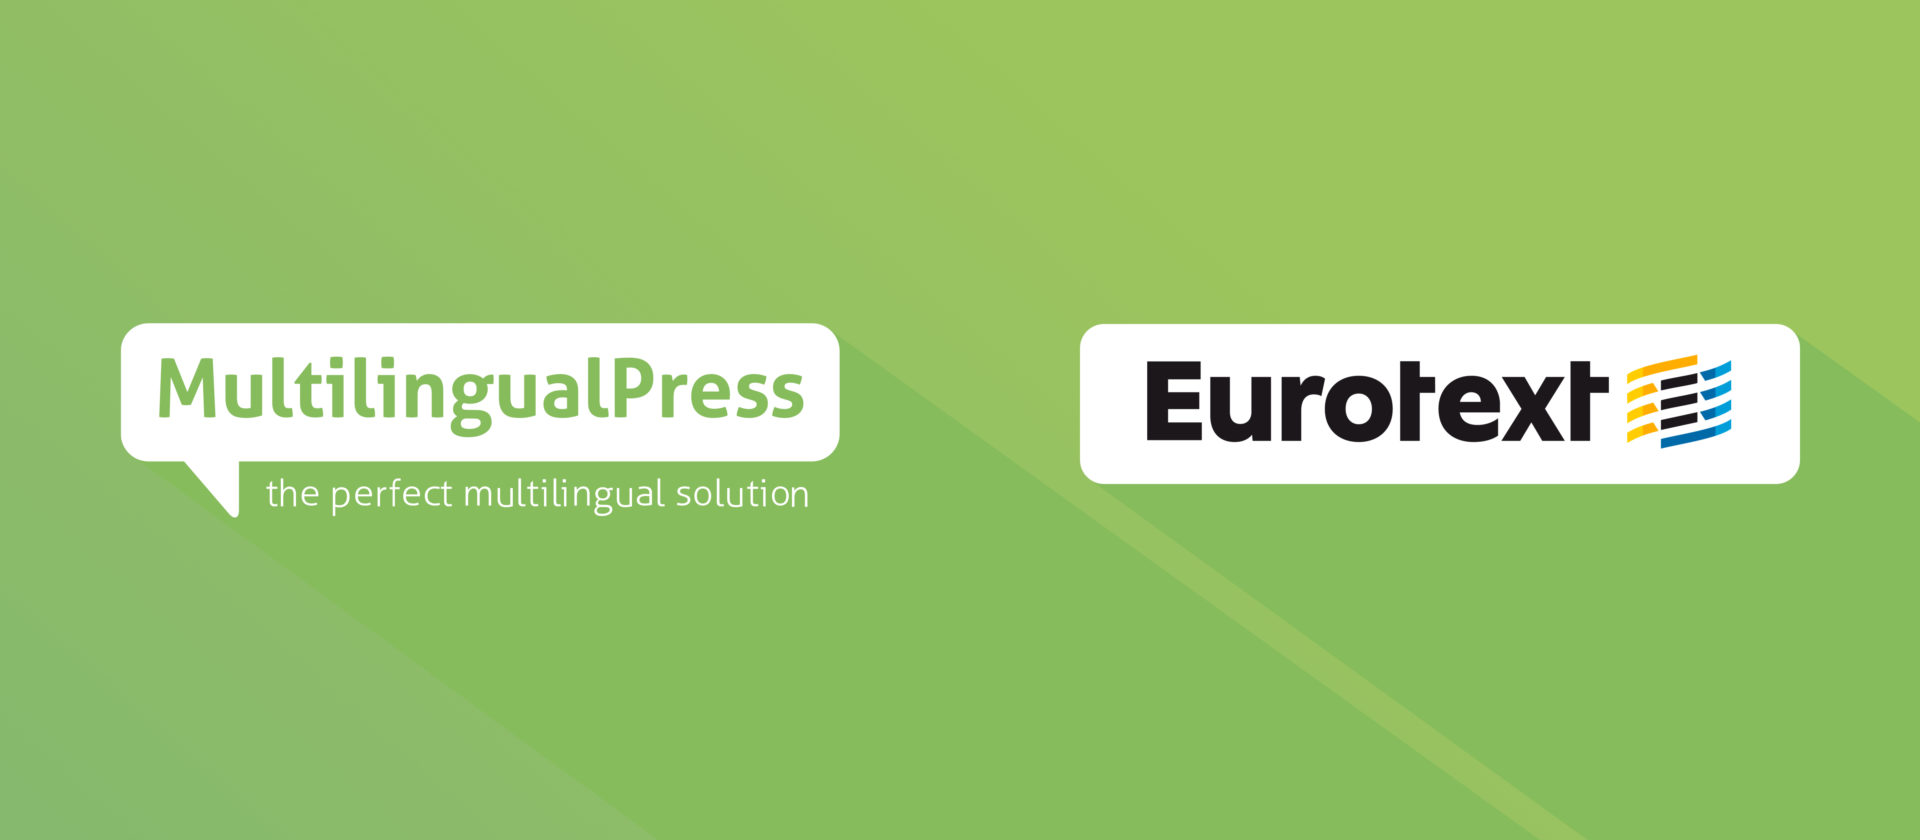 A multilingual web presence with WordPress is easy when having good partners.